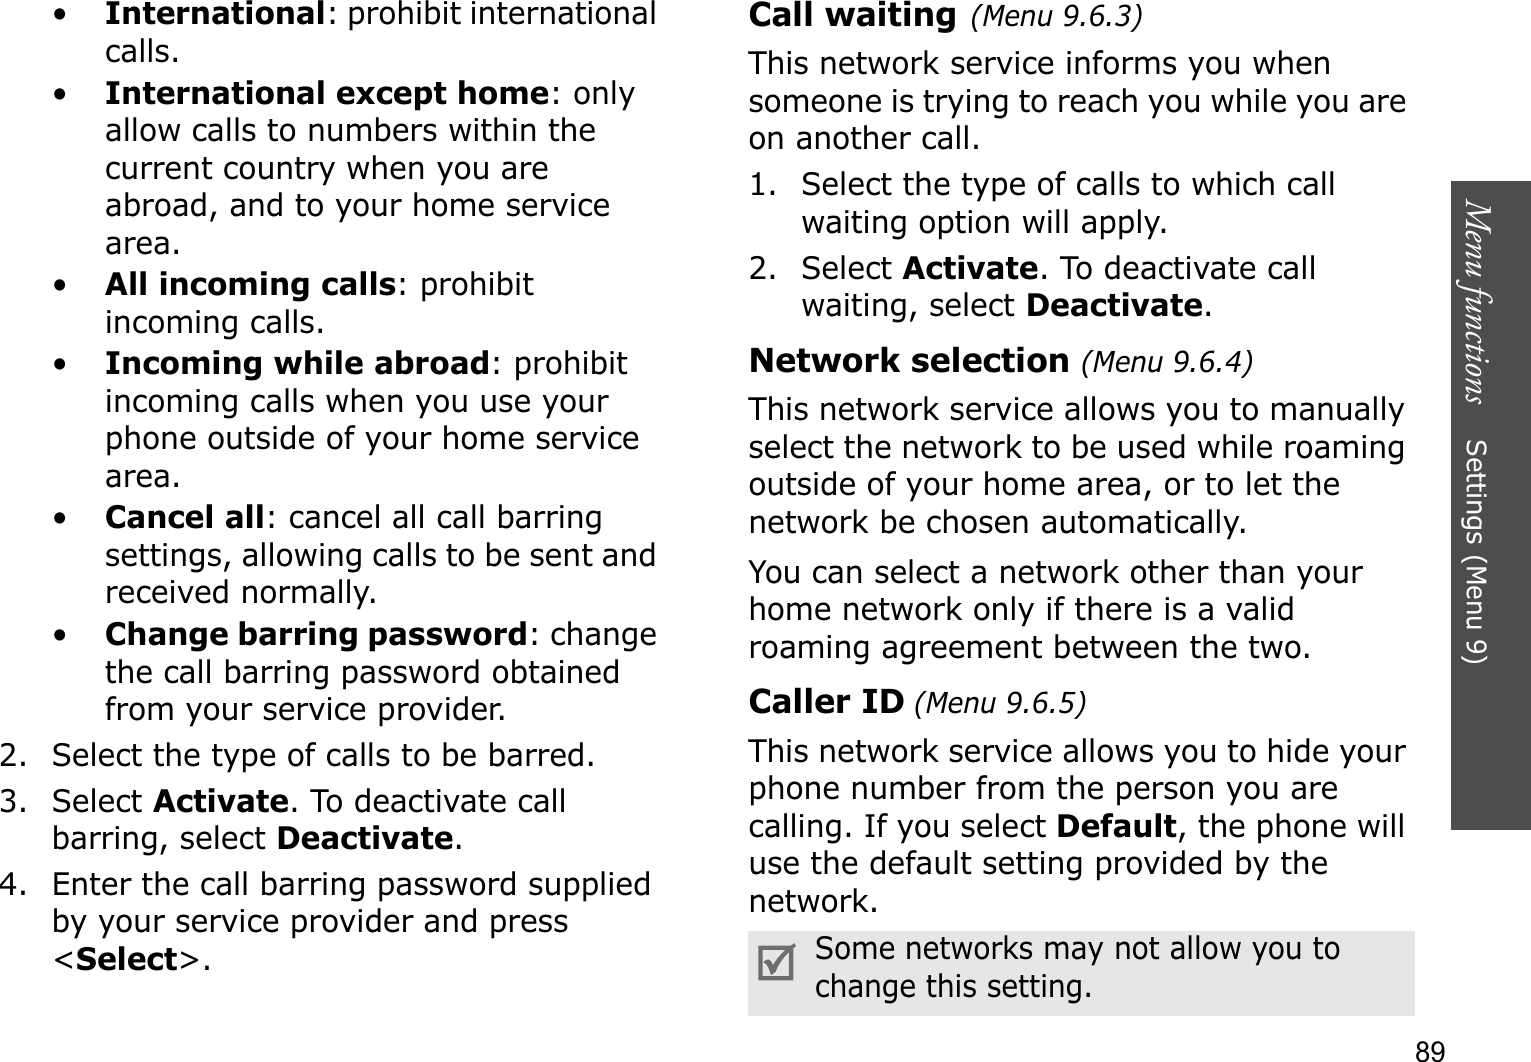 Menu functions    Settings (Menu 9)89•International: prohibit international calls.•International except home: only allow calls to numbers within the current country when you are abroad, and to your home service area.•All incoming calls: prohibit incoming calls.•Incoming while abroad: prohibit incoming calls when you use your phone outside of your home service area.•Cancel all: cancel all call barring settings, allowing calls to be sent and received normally.•Change barring password: change the call barring password obtained from your service provider.2. Select the type of calls to be barred. 3. Select Activate. To deactivate call barring, select Deactivate.4. Enter the call barring password supplied by your service provider and press &lt;Select&gt;.Call waiting(Menu 9.6.3)This network service informs you when someone is trying to reach you while you are on another call.1. Select the type of calls to which call waiting option will apply.2. Select Activate. To deactivate call waiting, select Deactivate.Network selection (Menu 9.6.4)This network service allows you to manually select the network to be used while roaming outside of your home area, or to let the network be chosen automatically. You can select a network other than your home network only if there is a valid roaming agreement between the two.Caller ID (Menu 9.6.5)This network service allows you to hide your phone number from the person you are calling. If you select Default, the phone will use the default setting provided by the network.Some networks may not allow you to change this setting.